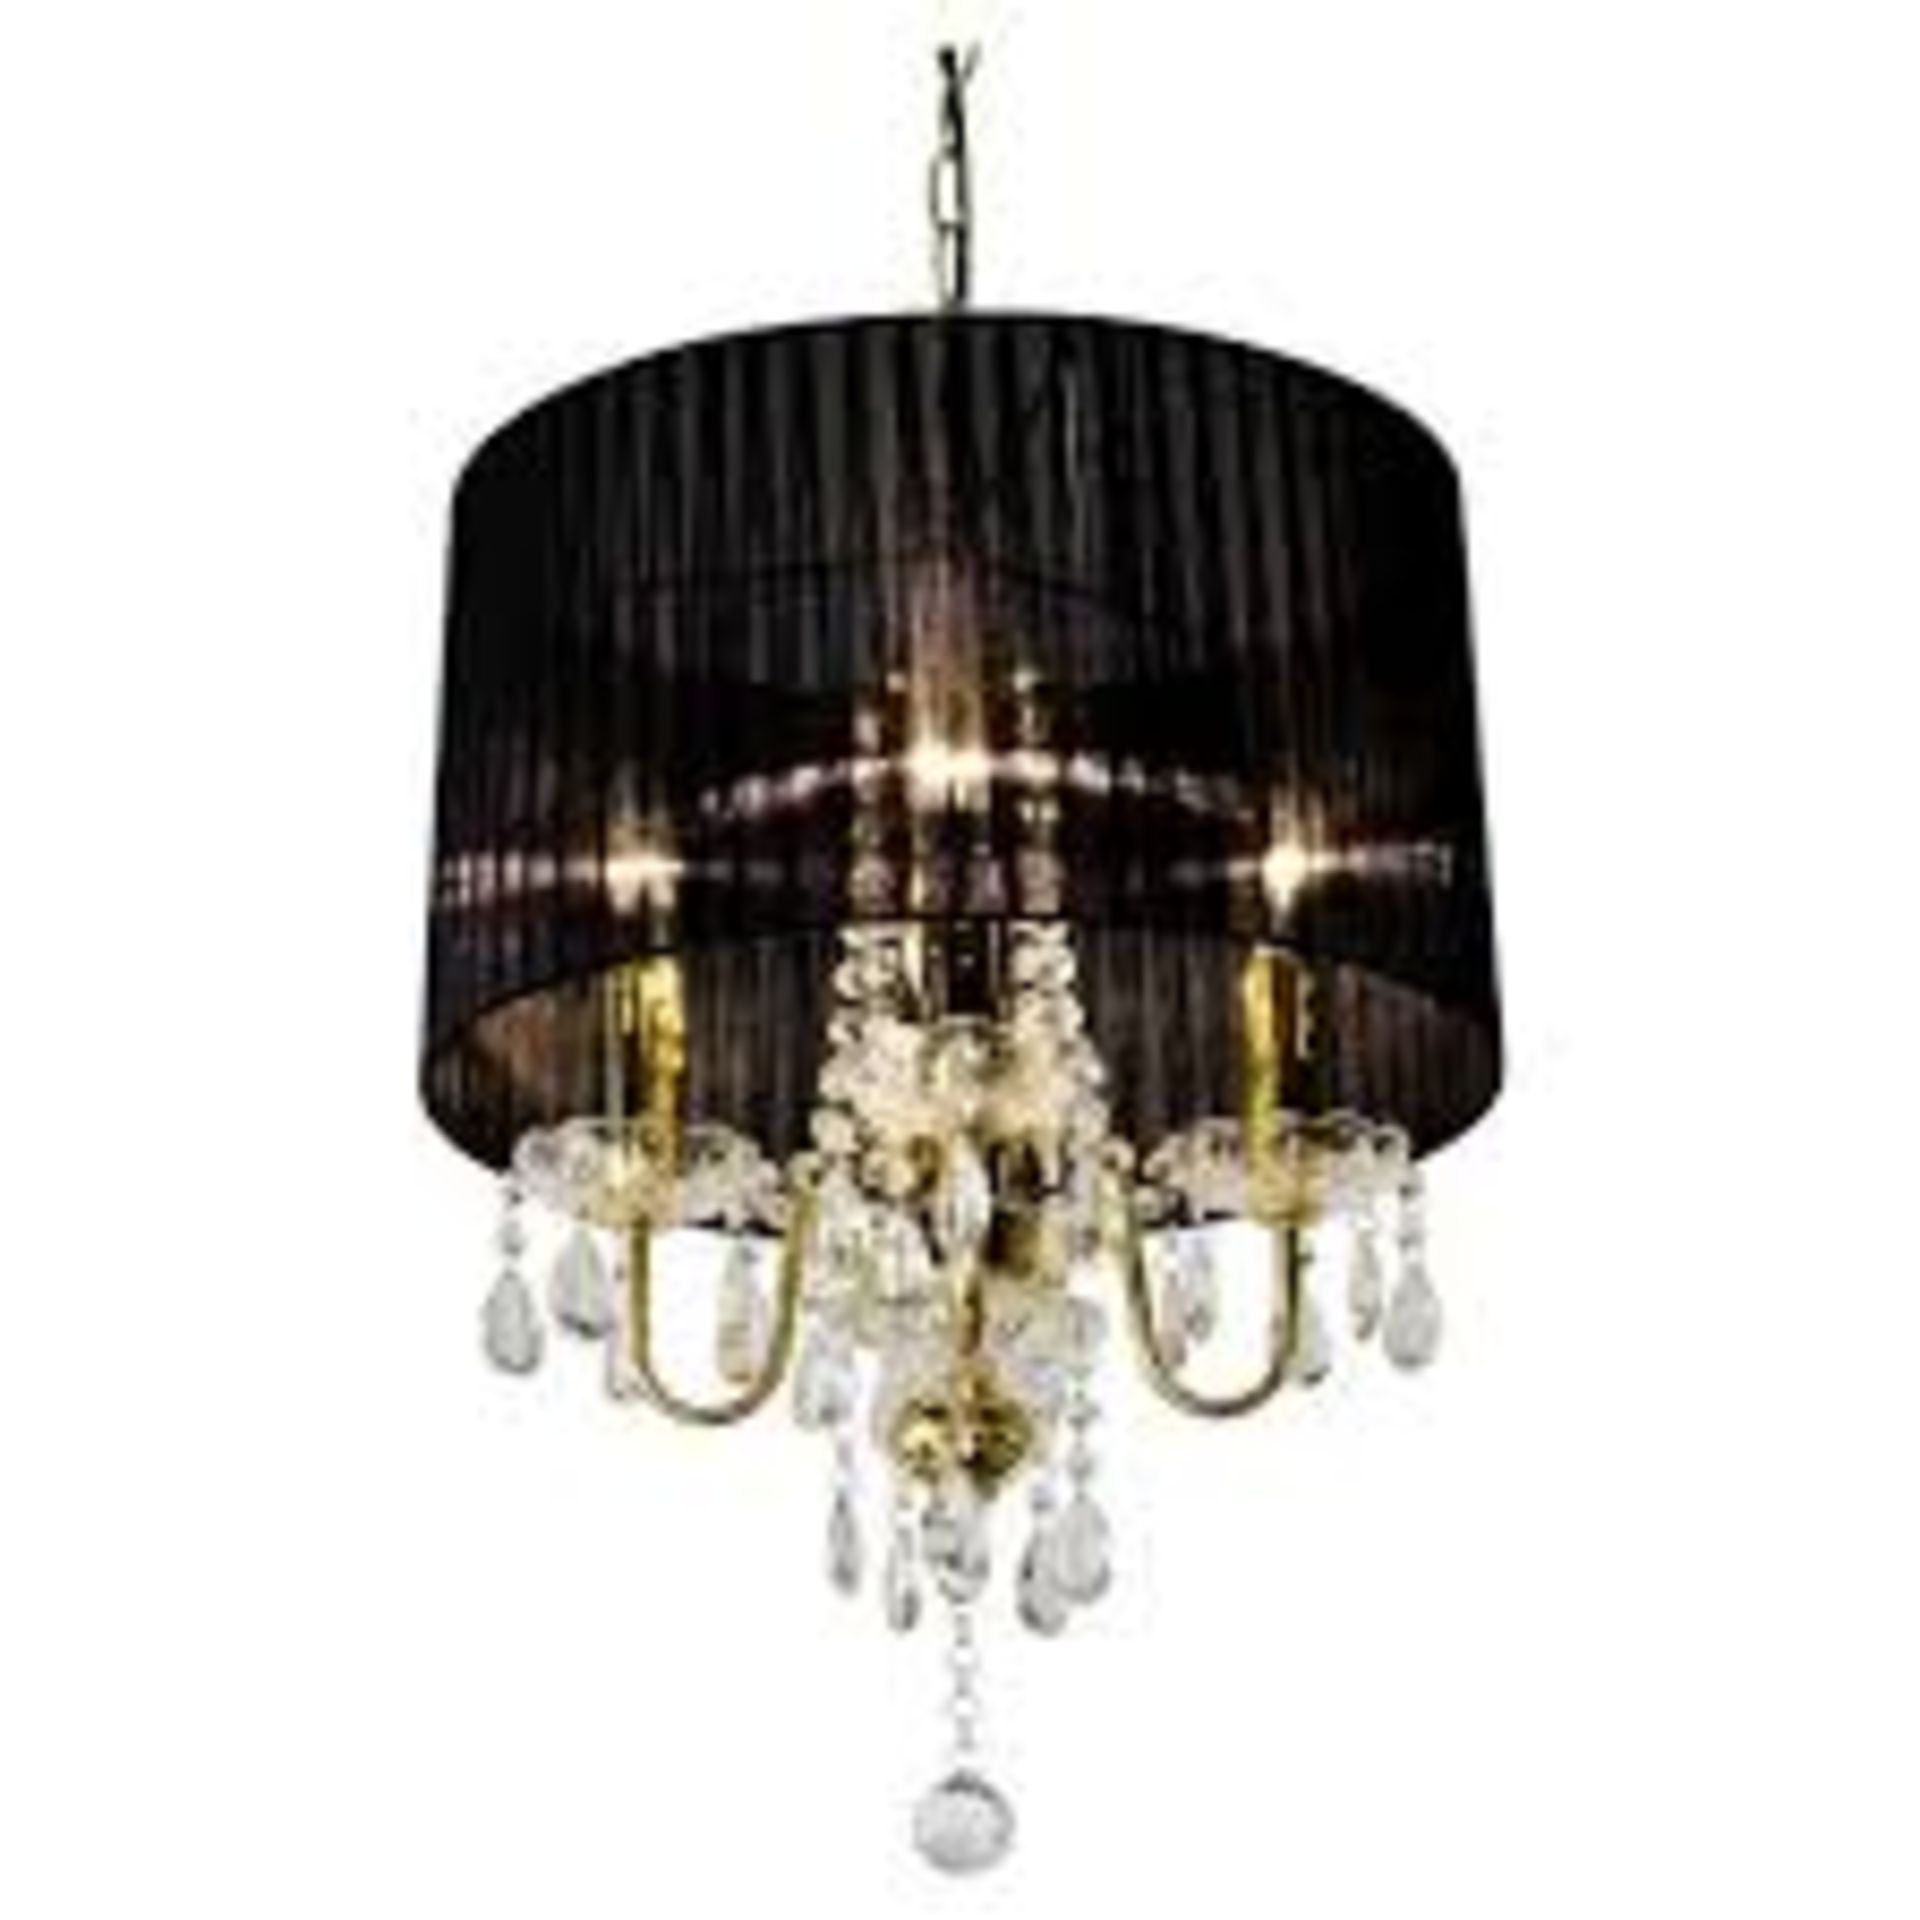 Boxed Designer Warrick 4 Light Drum Shade Chandelier Light RRP £110 (17088) (Pictures Are For